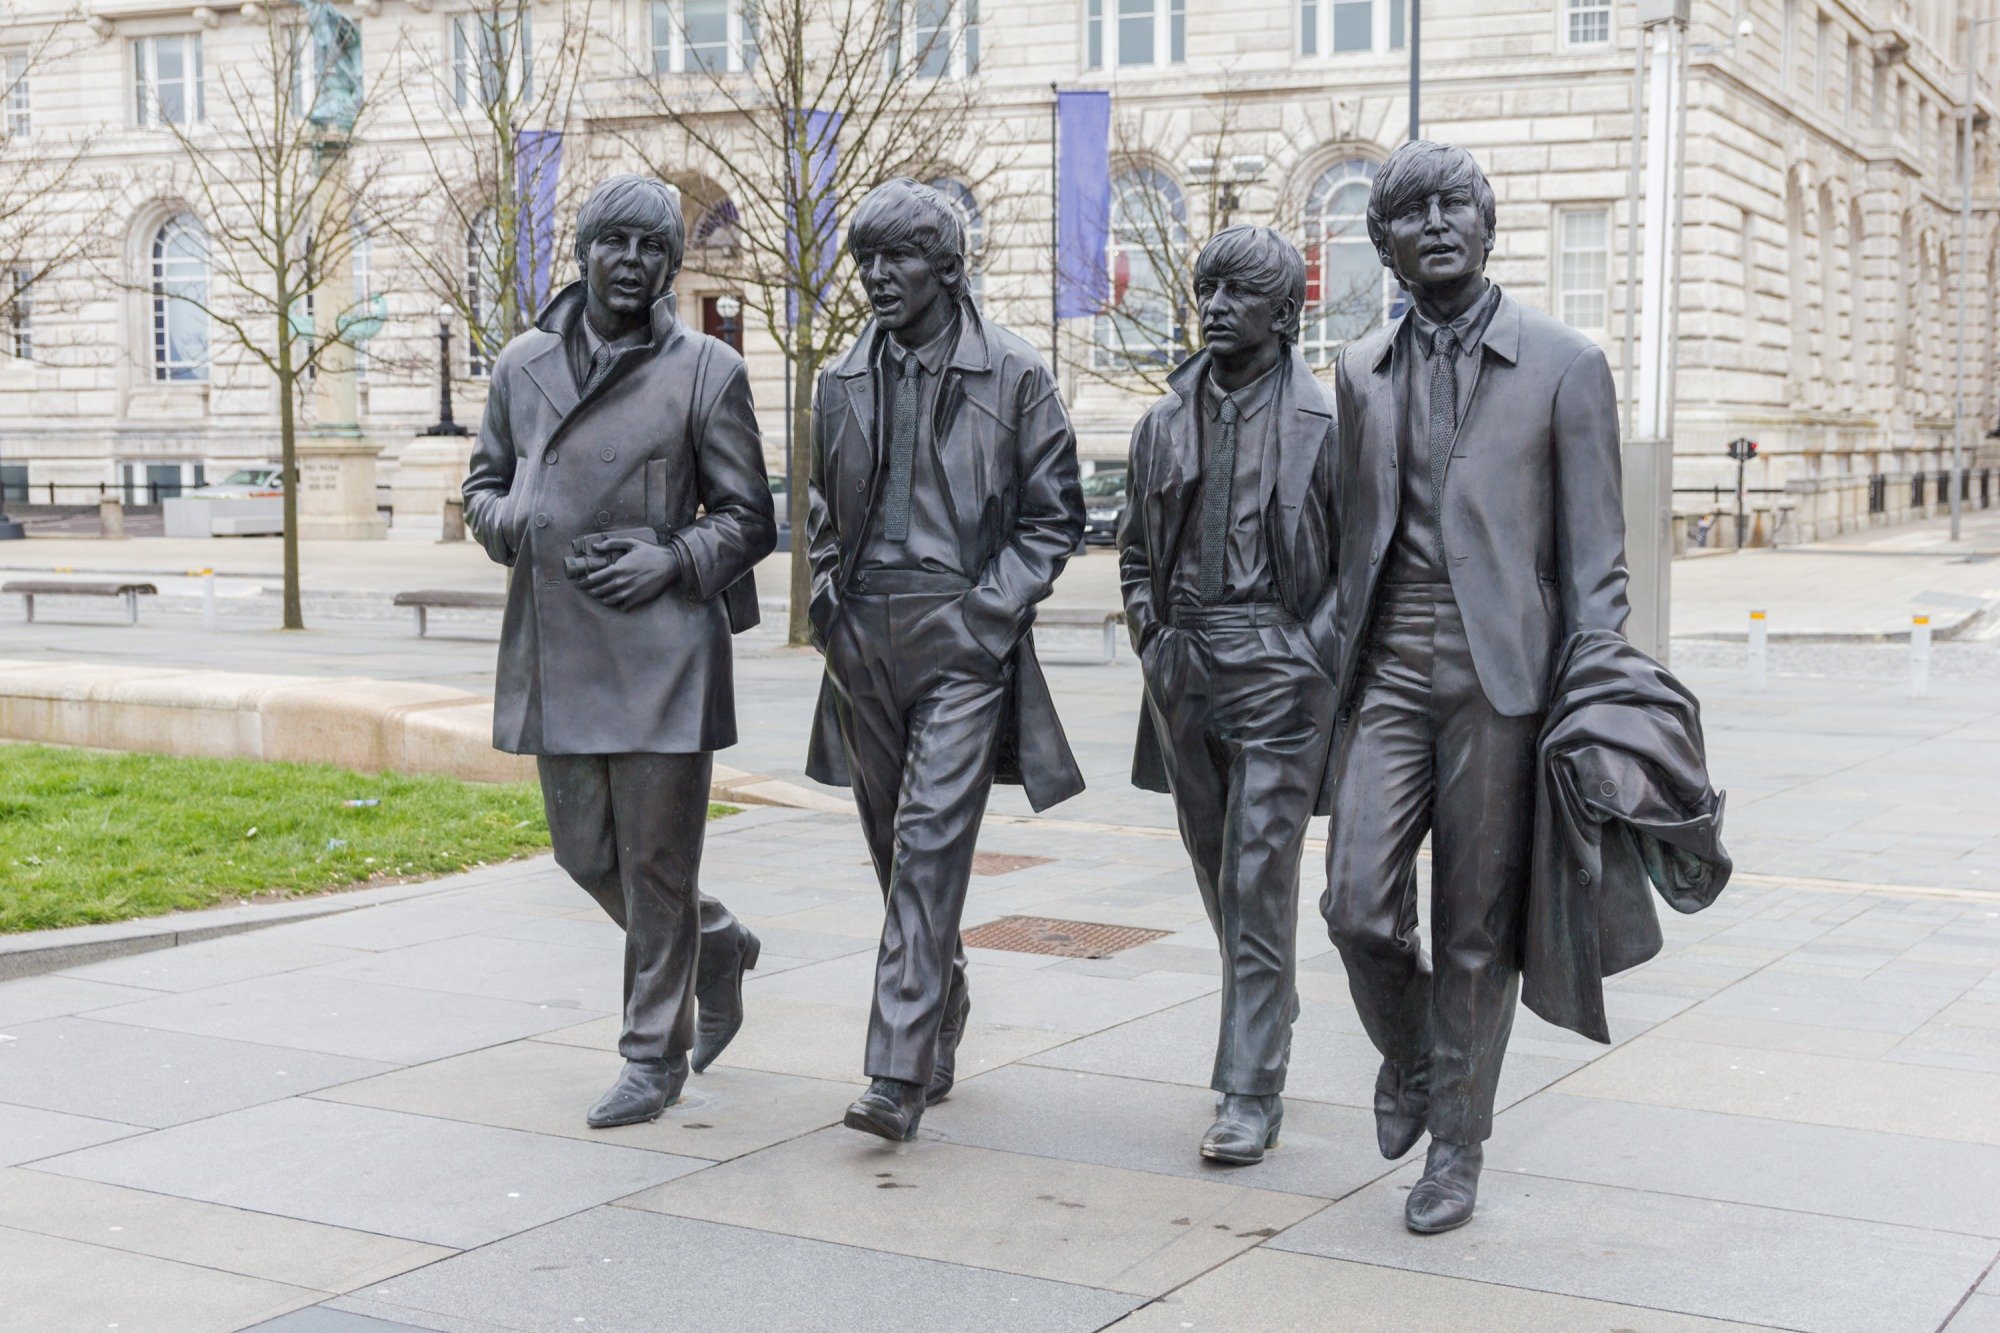 Statue of the Beatles in Liverpool